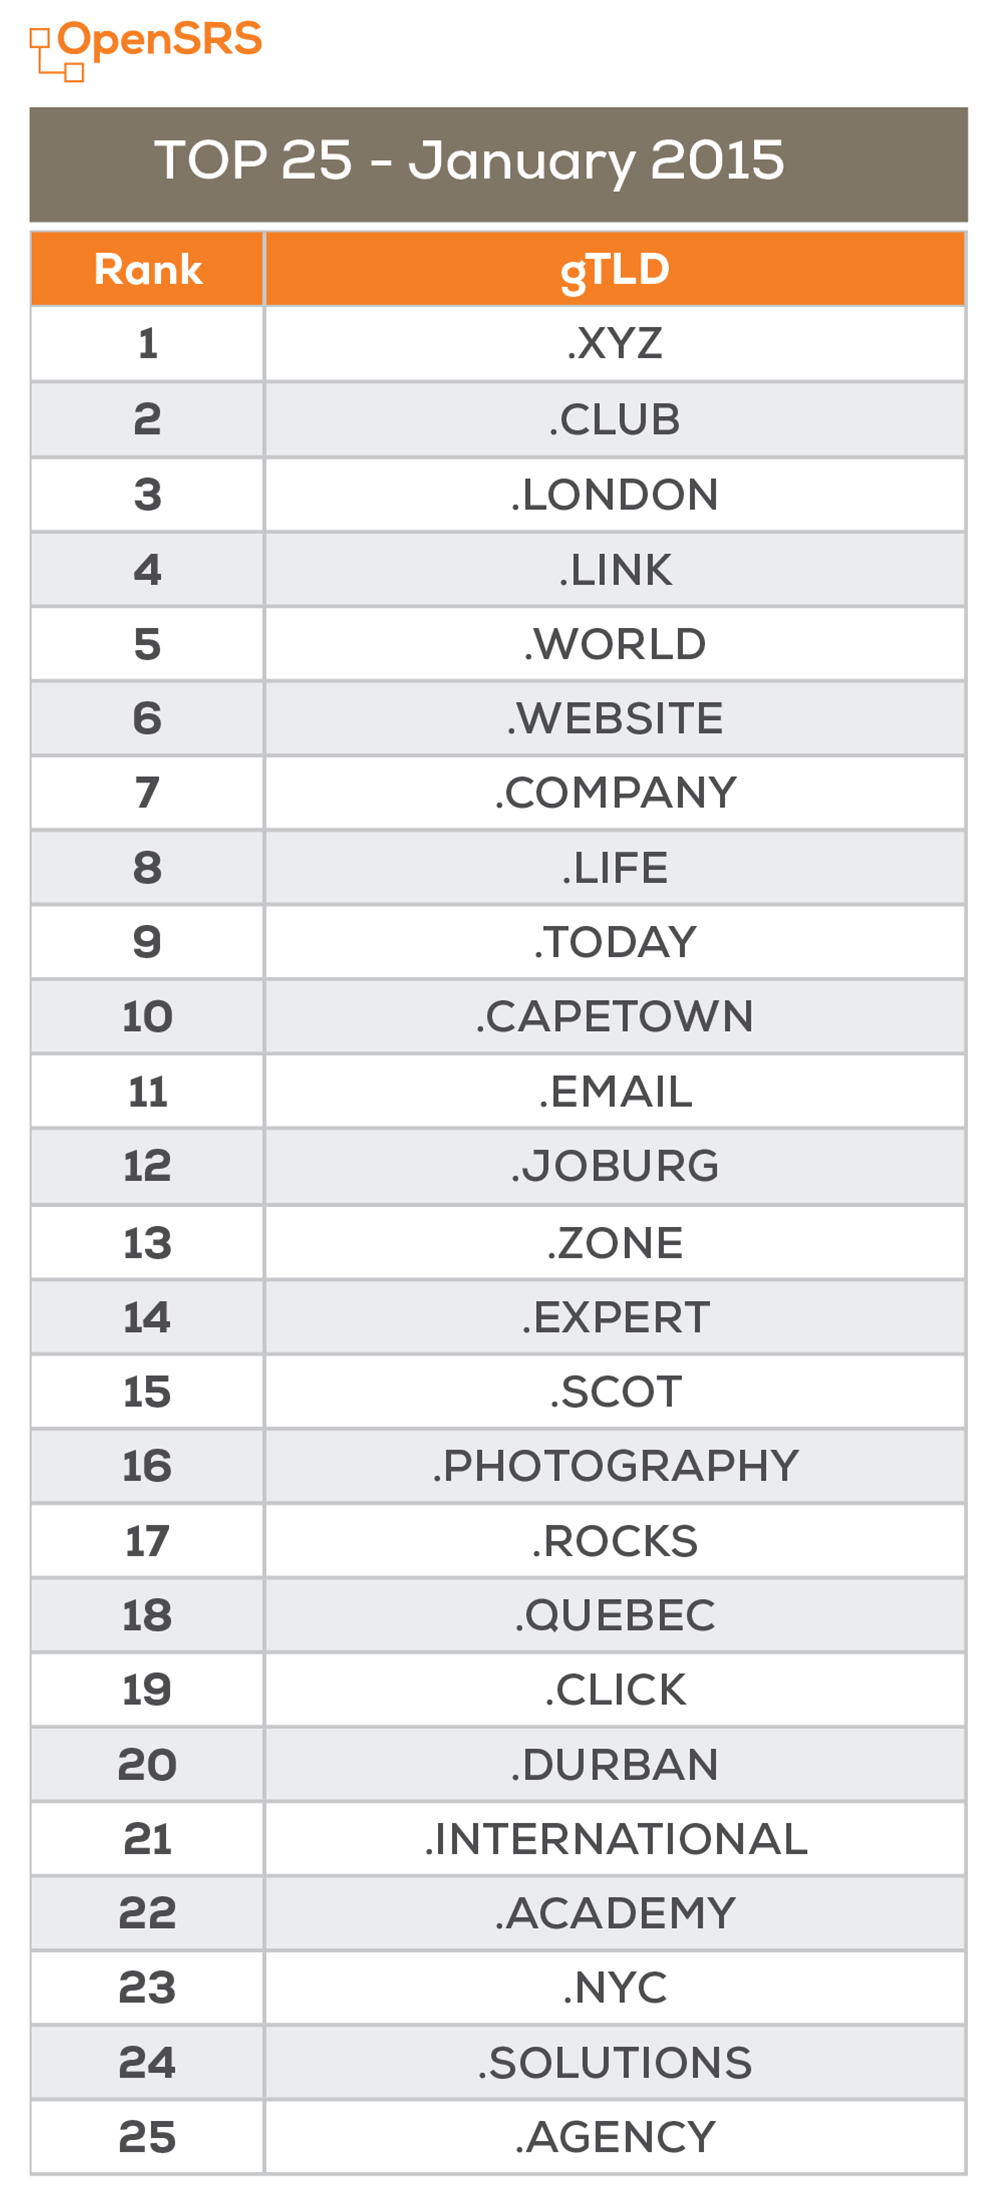 OpenSRS top 25 gTLDS for January 2015